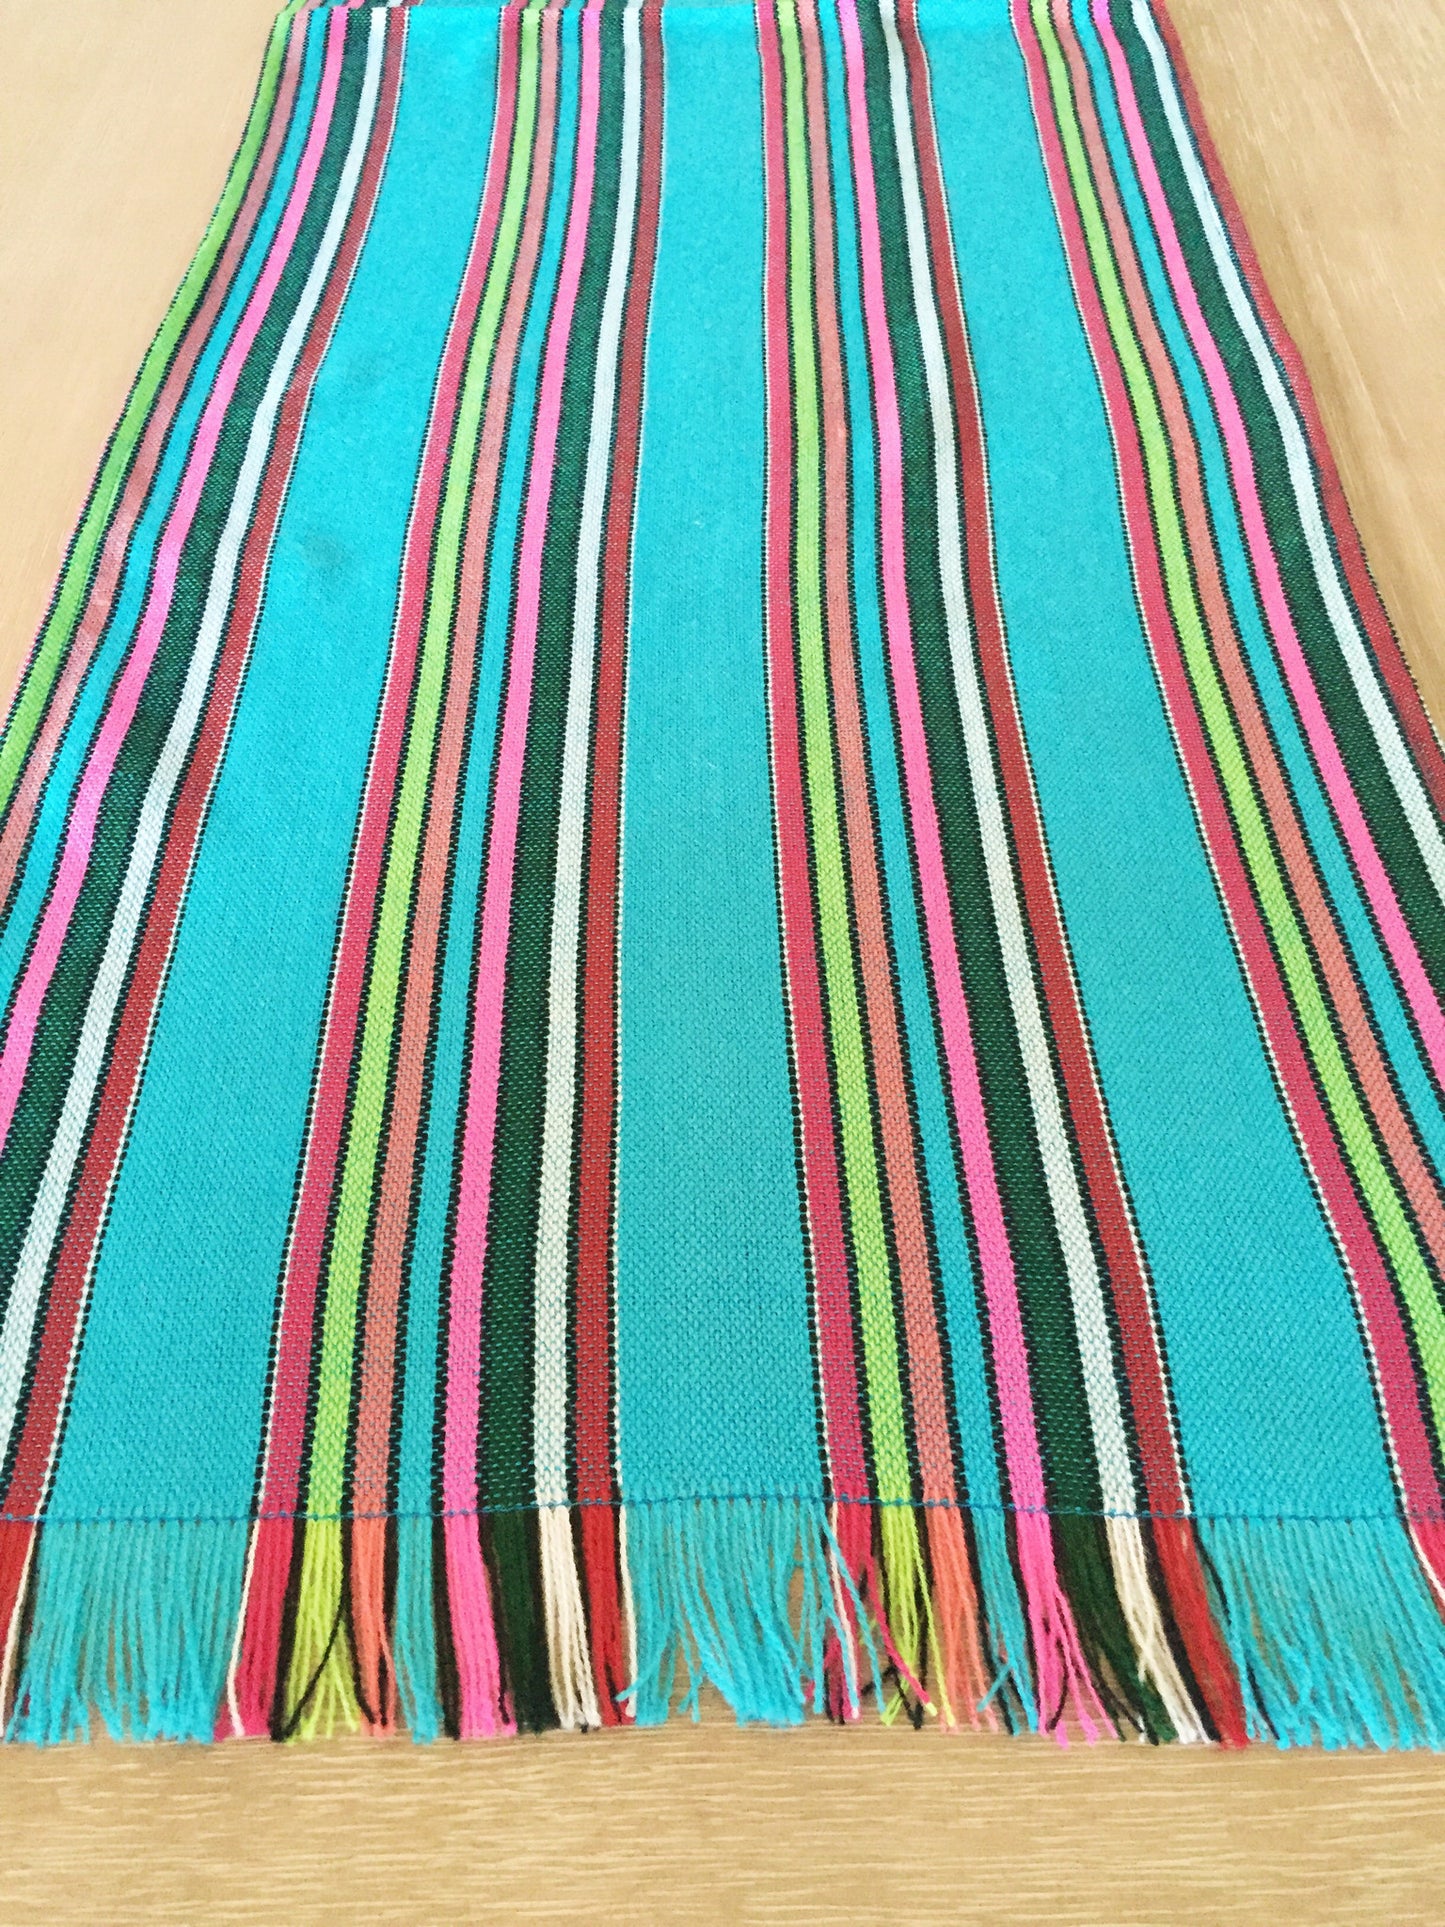 Mexican Fabric Table Runner Colorful Teal Stripes - MesaChic - 2